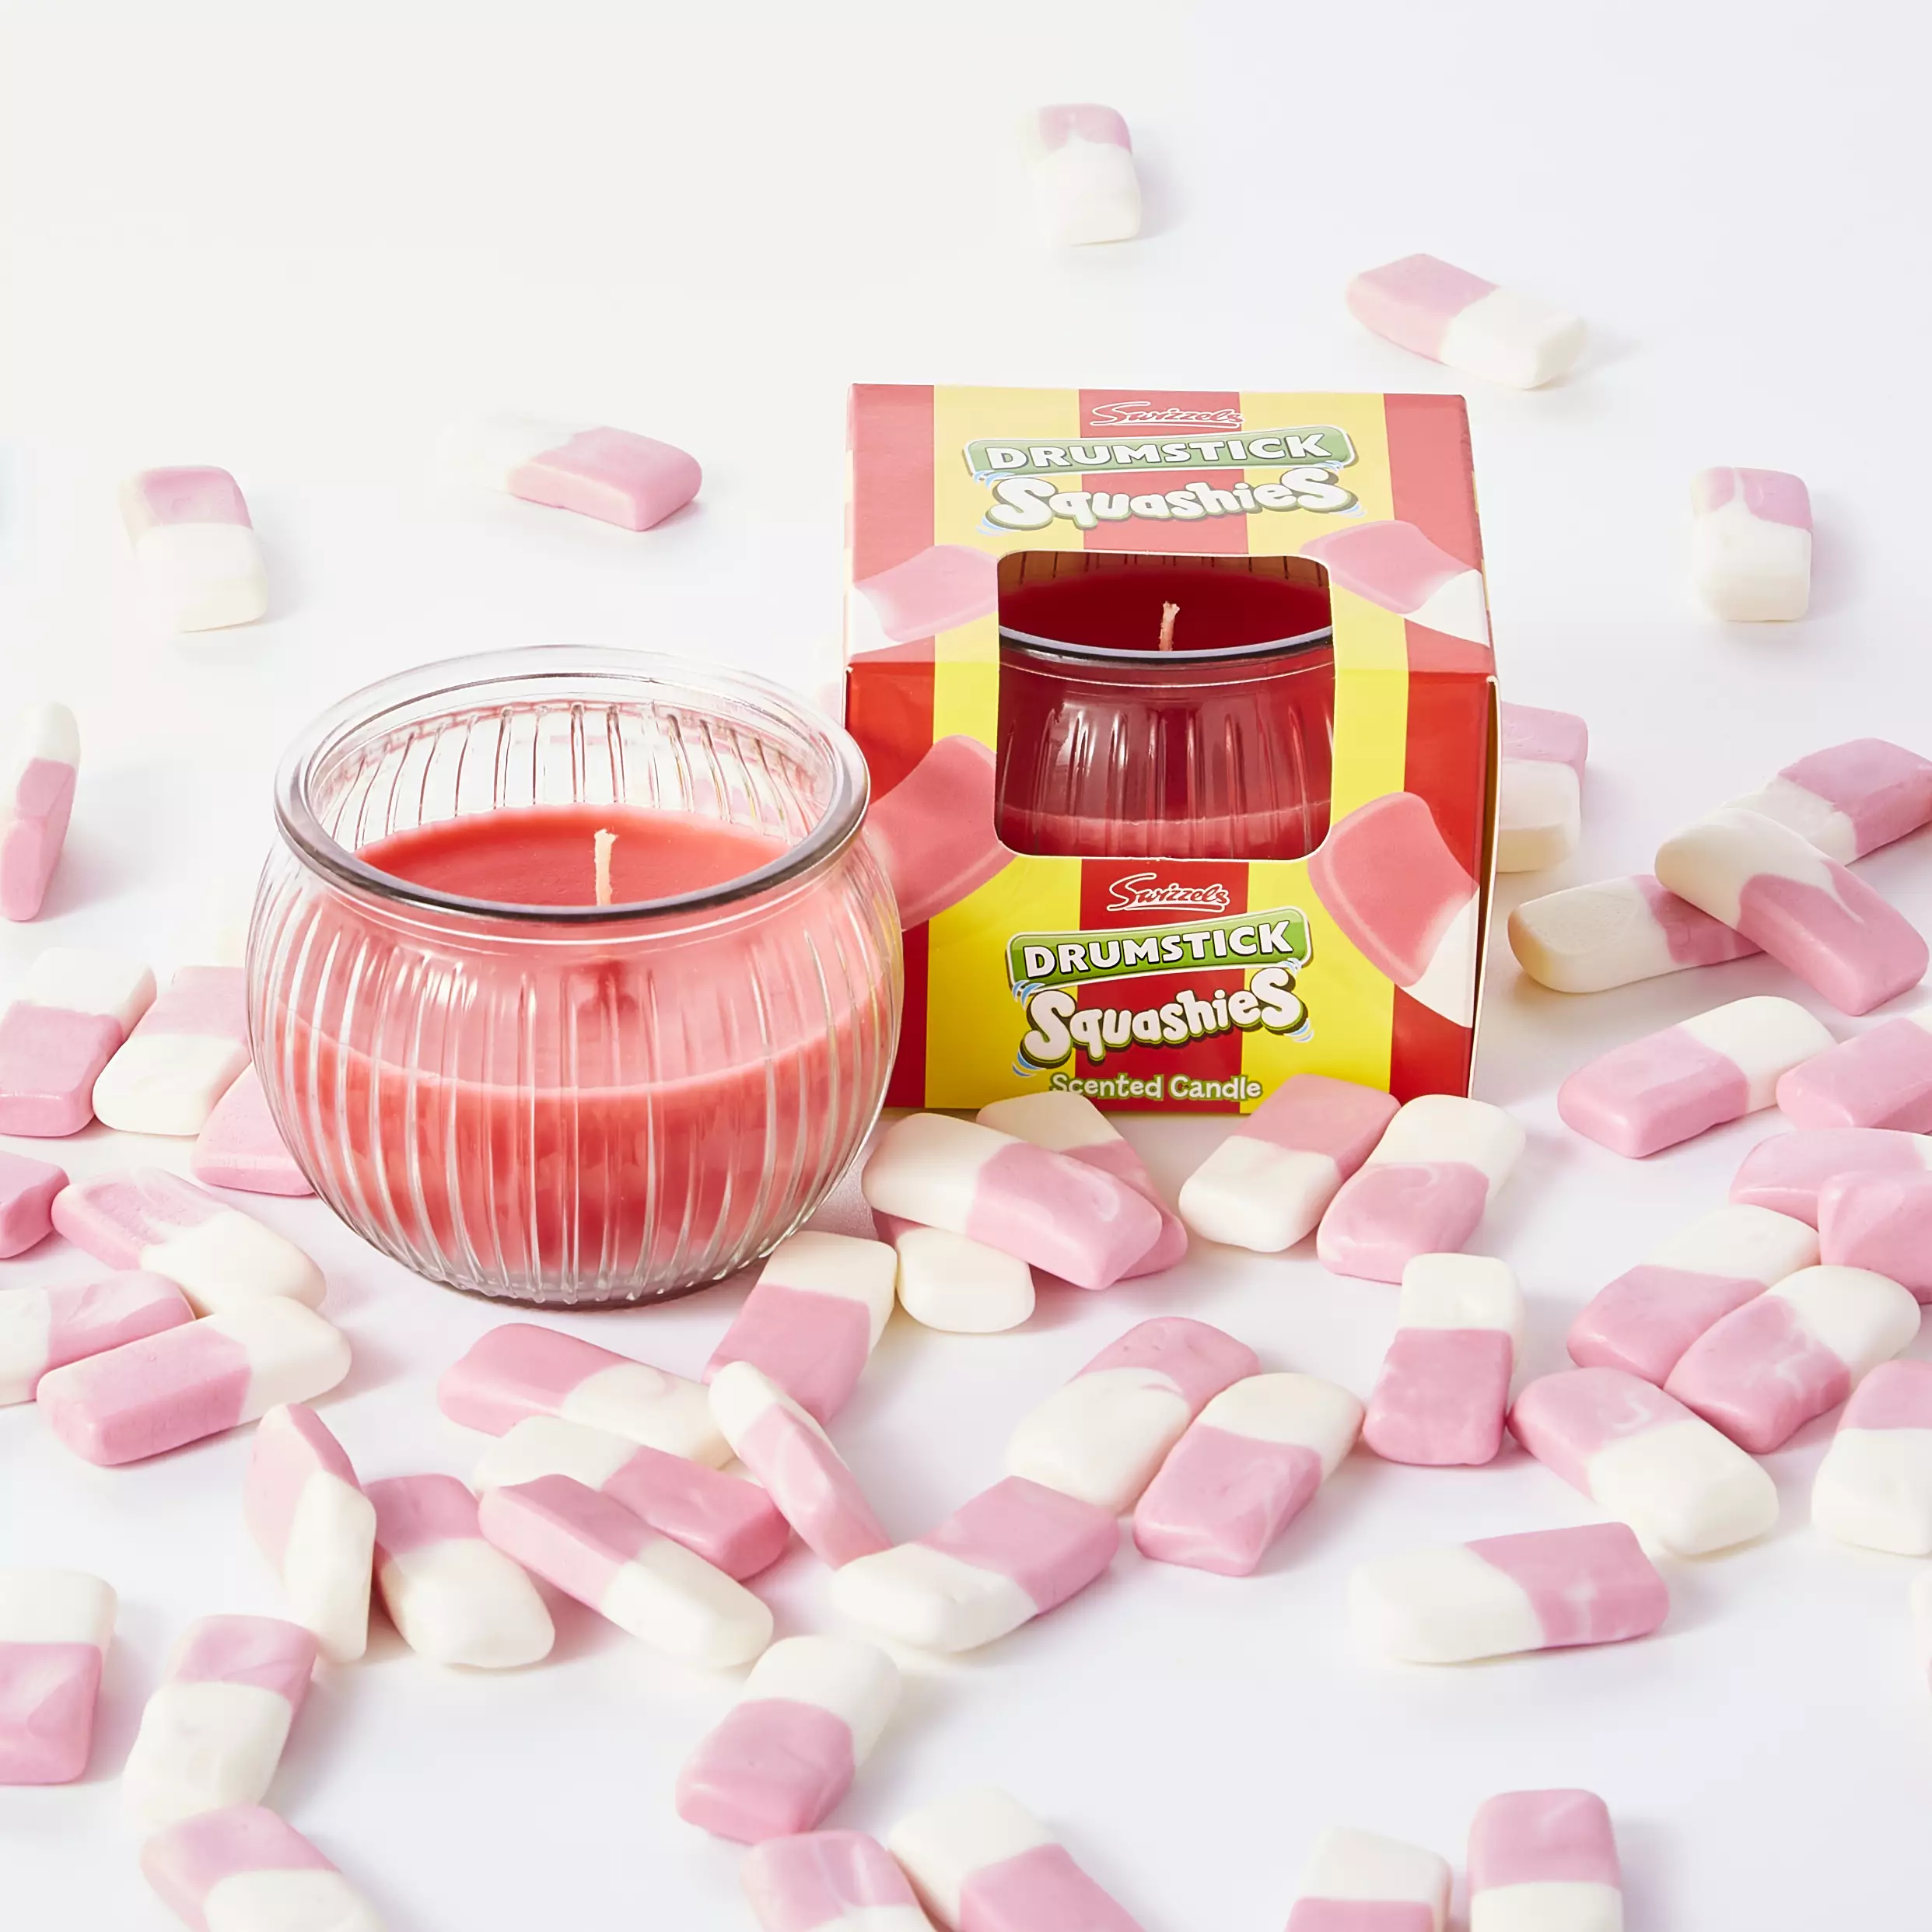 The scented candles come in a range of scents like Drumstick Squashies (